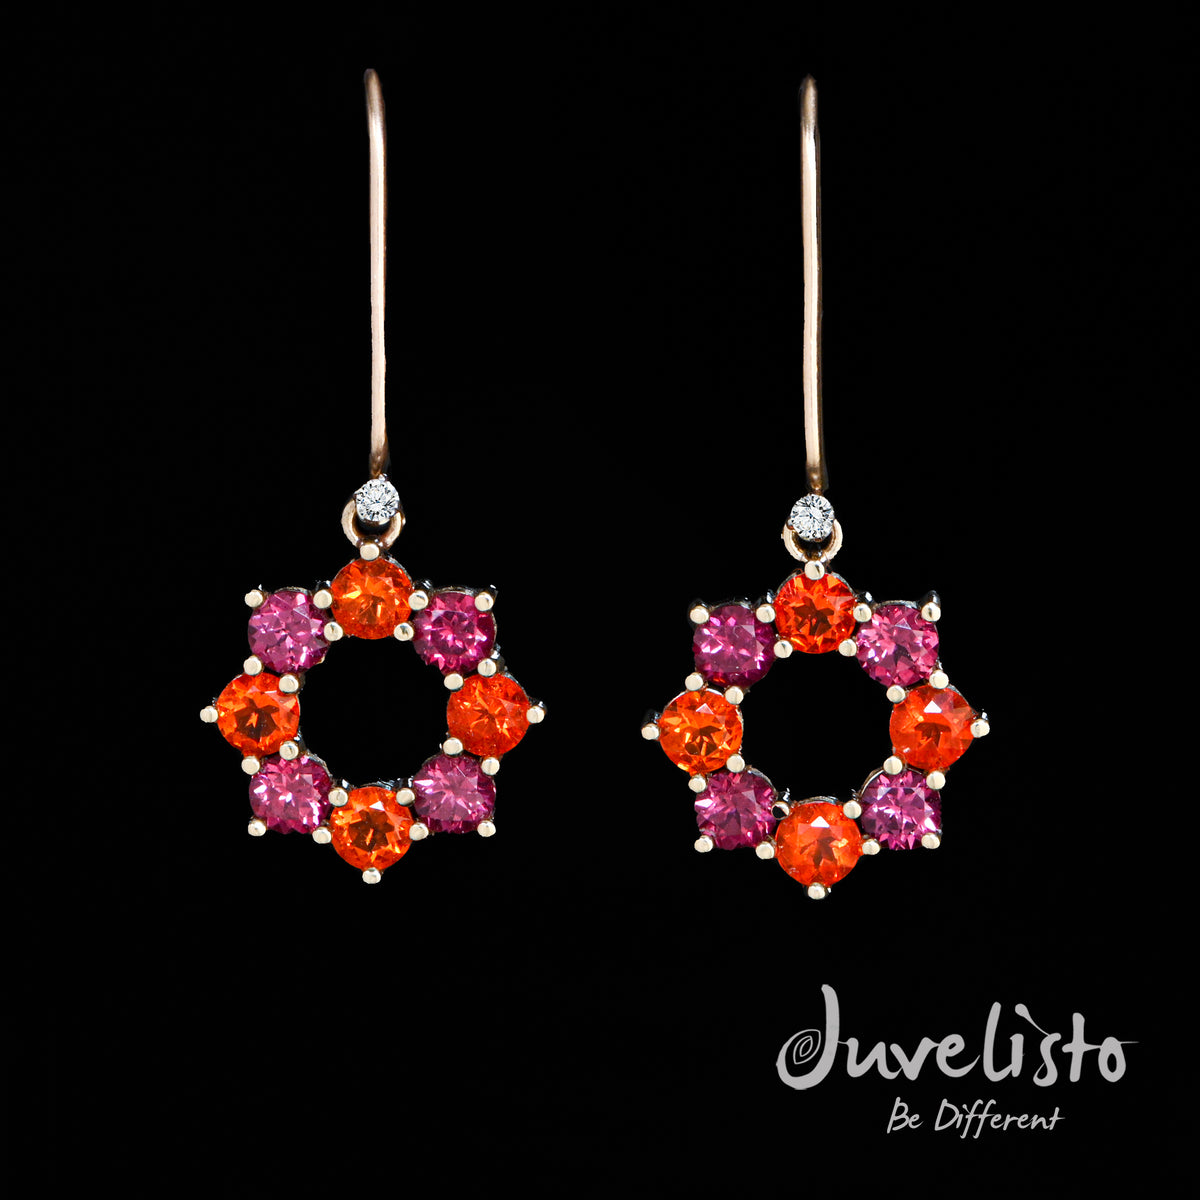 Juvelisto Design | 14K Gold Earrings with Fire Opals and Purple Garnets in a flower setting with Diamonds